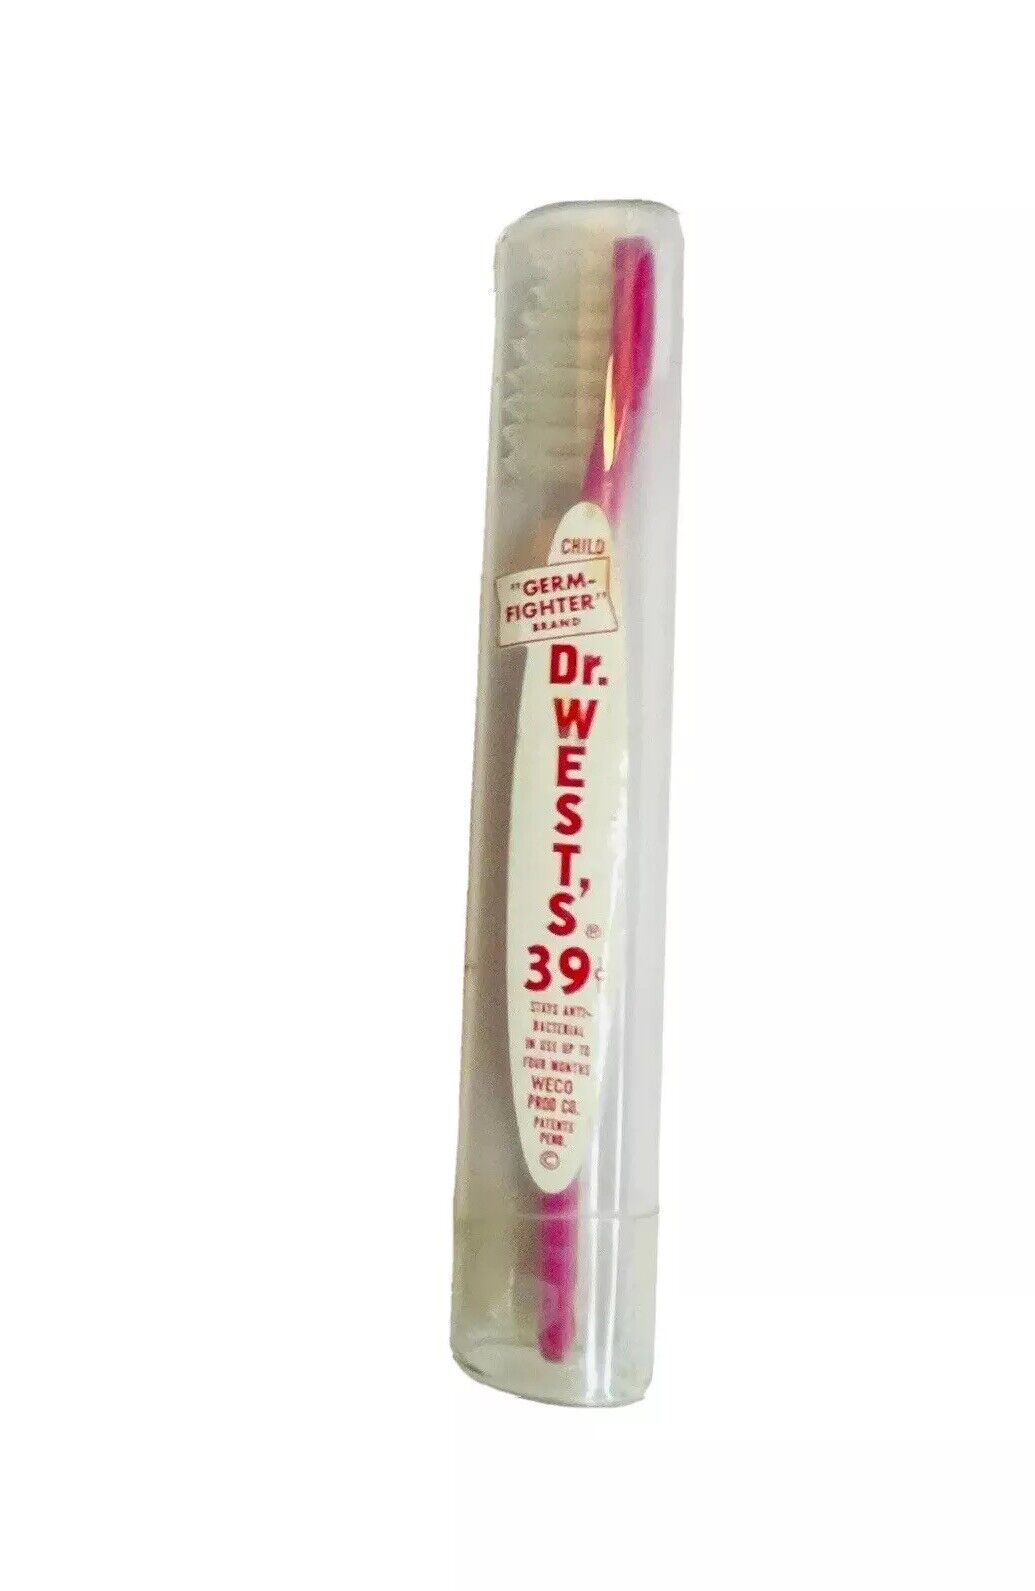 RARE DR. WEST’S GERM FIGHTER TOOTHBRUSH 1940s SEALED GLASS CHILD ANTIBACTERIAL